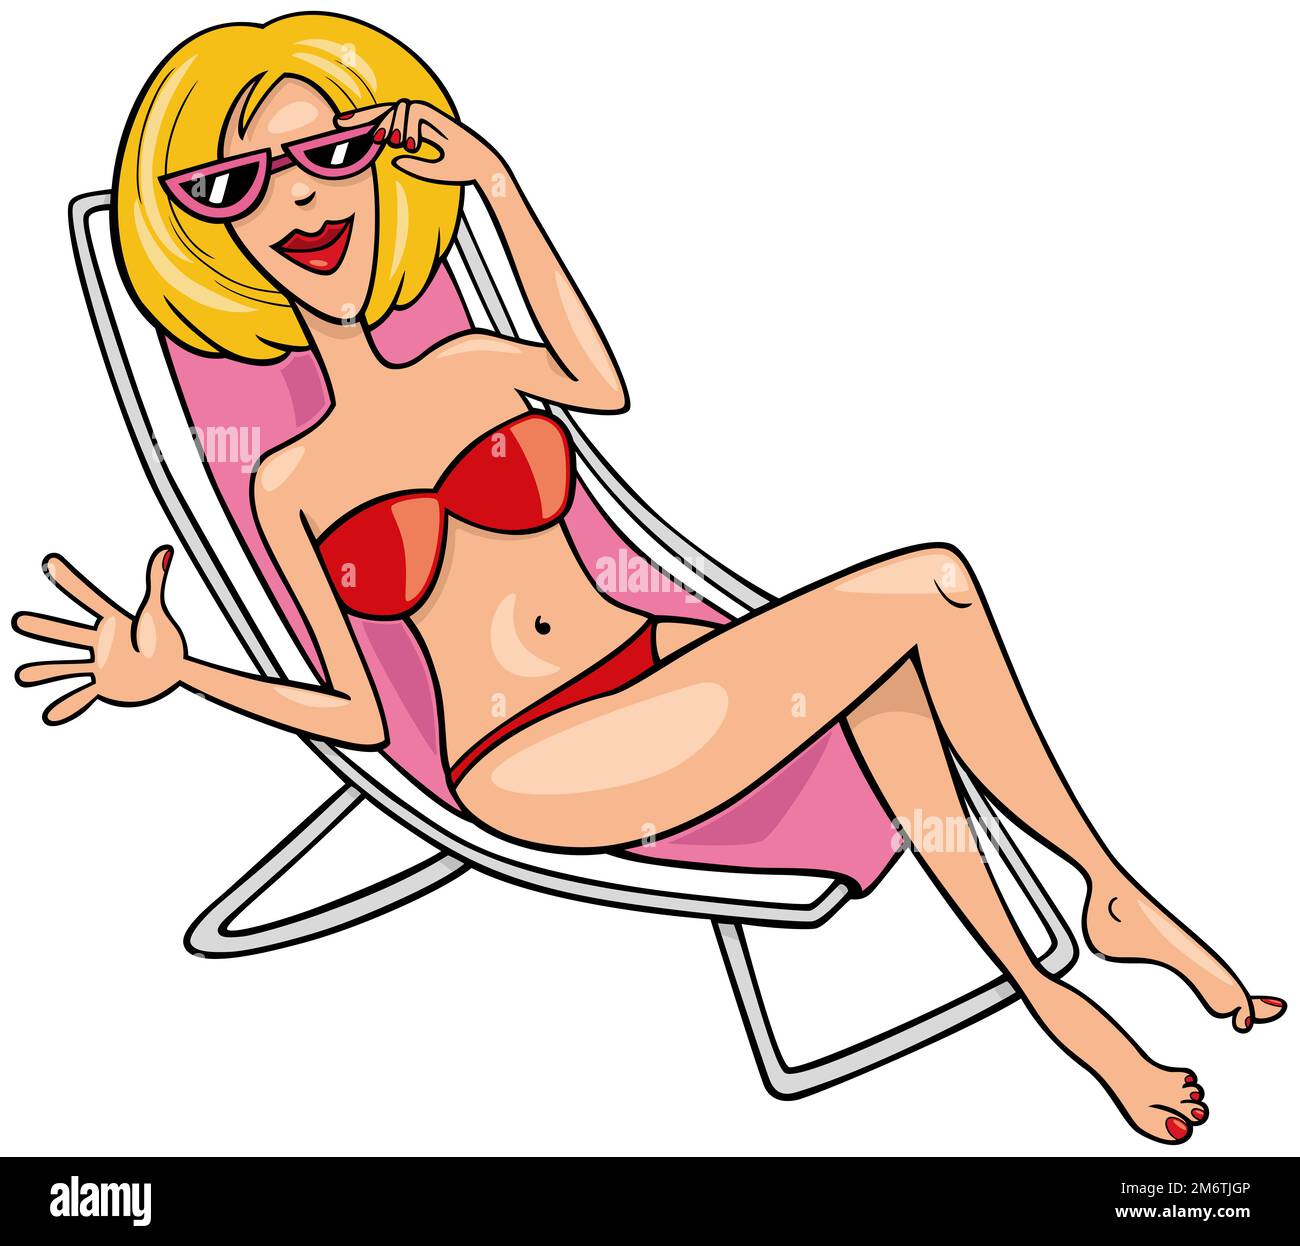 Bikini cartoon Cut Out Stock Images & Pictures - Alamy